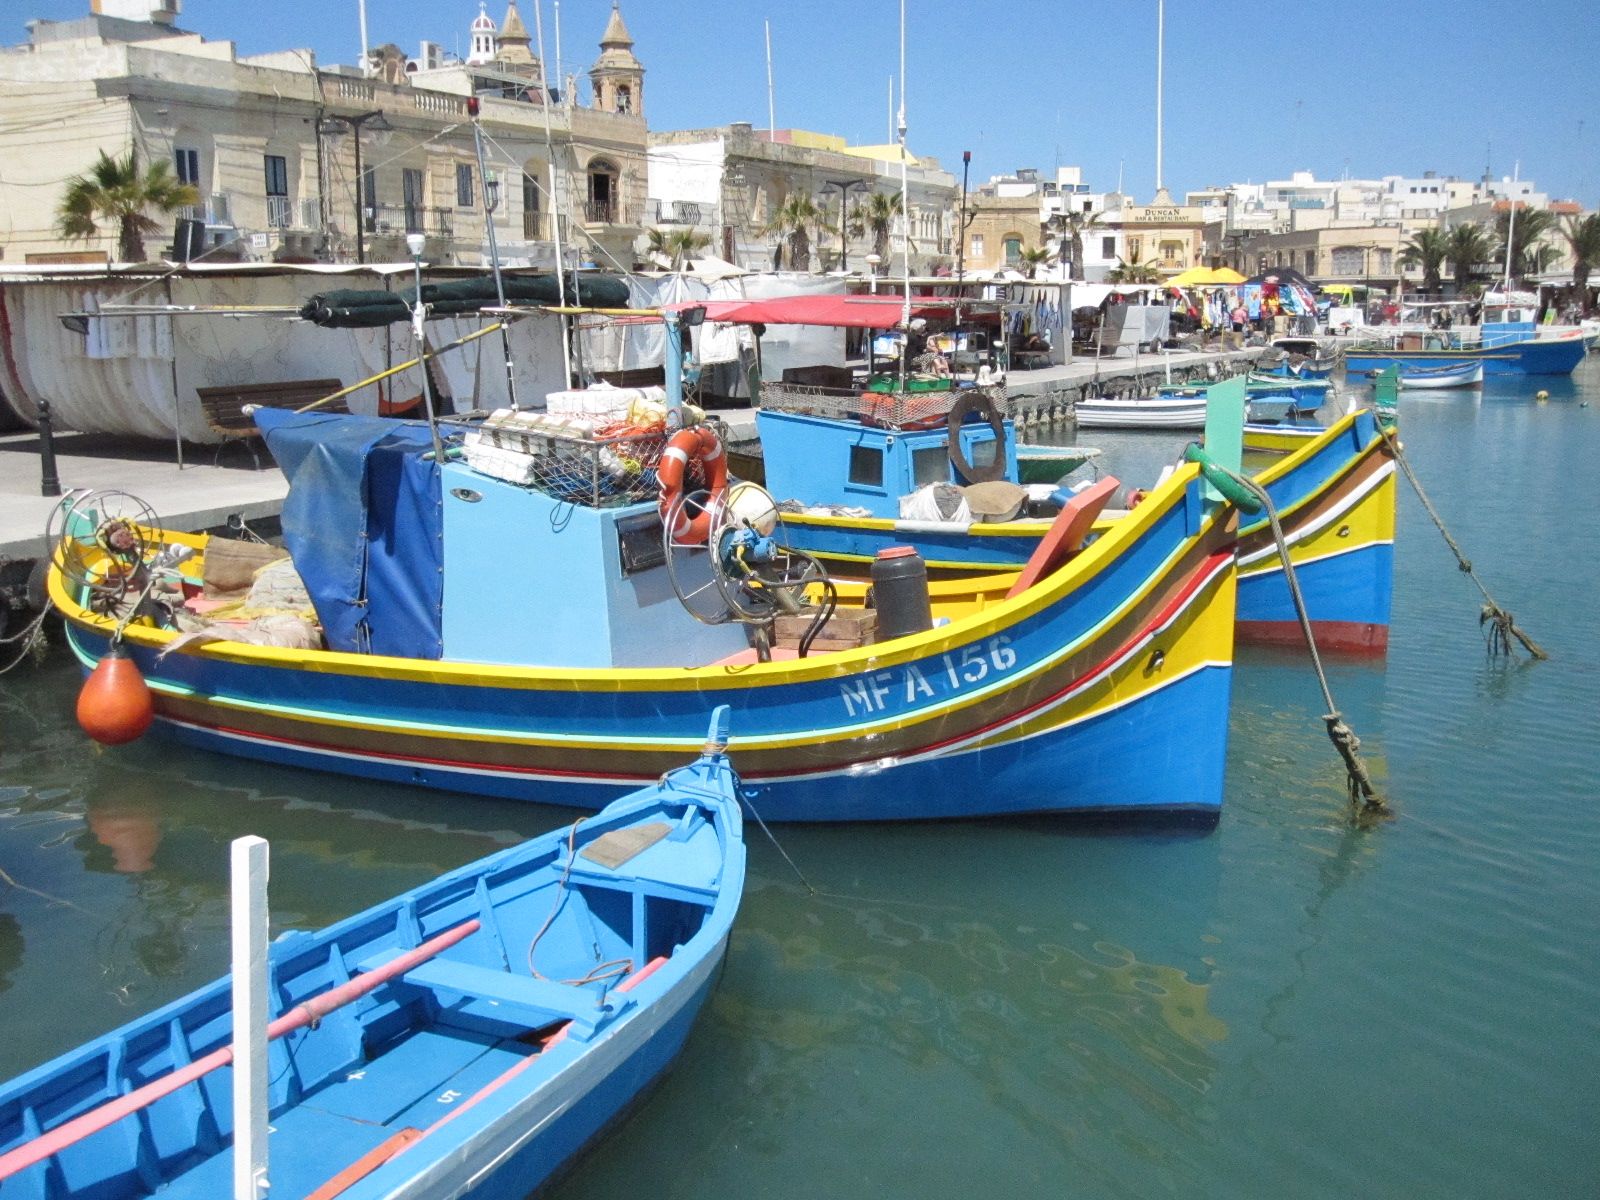 Scintillating Sicily some of the fishing boats of Sicily. | Local ...